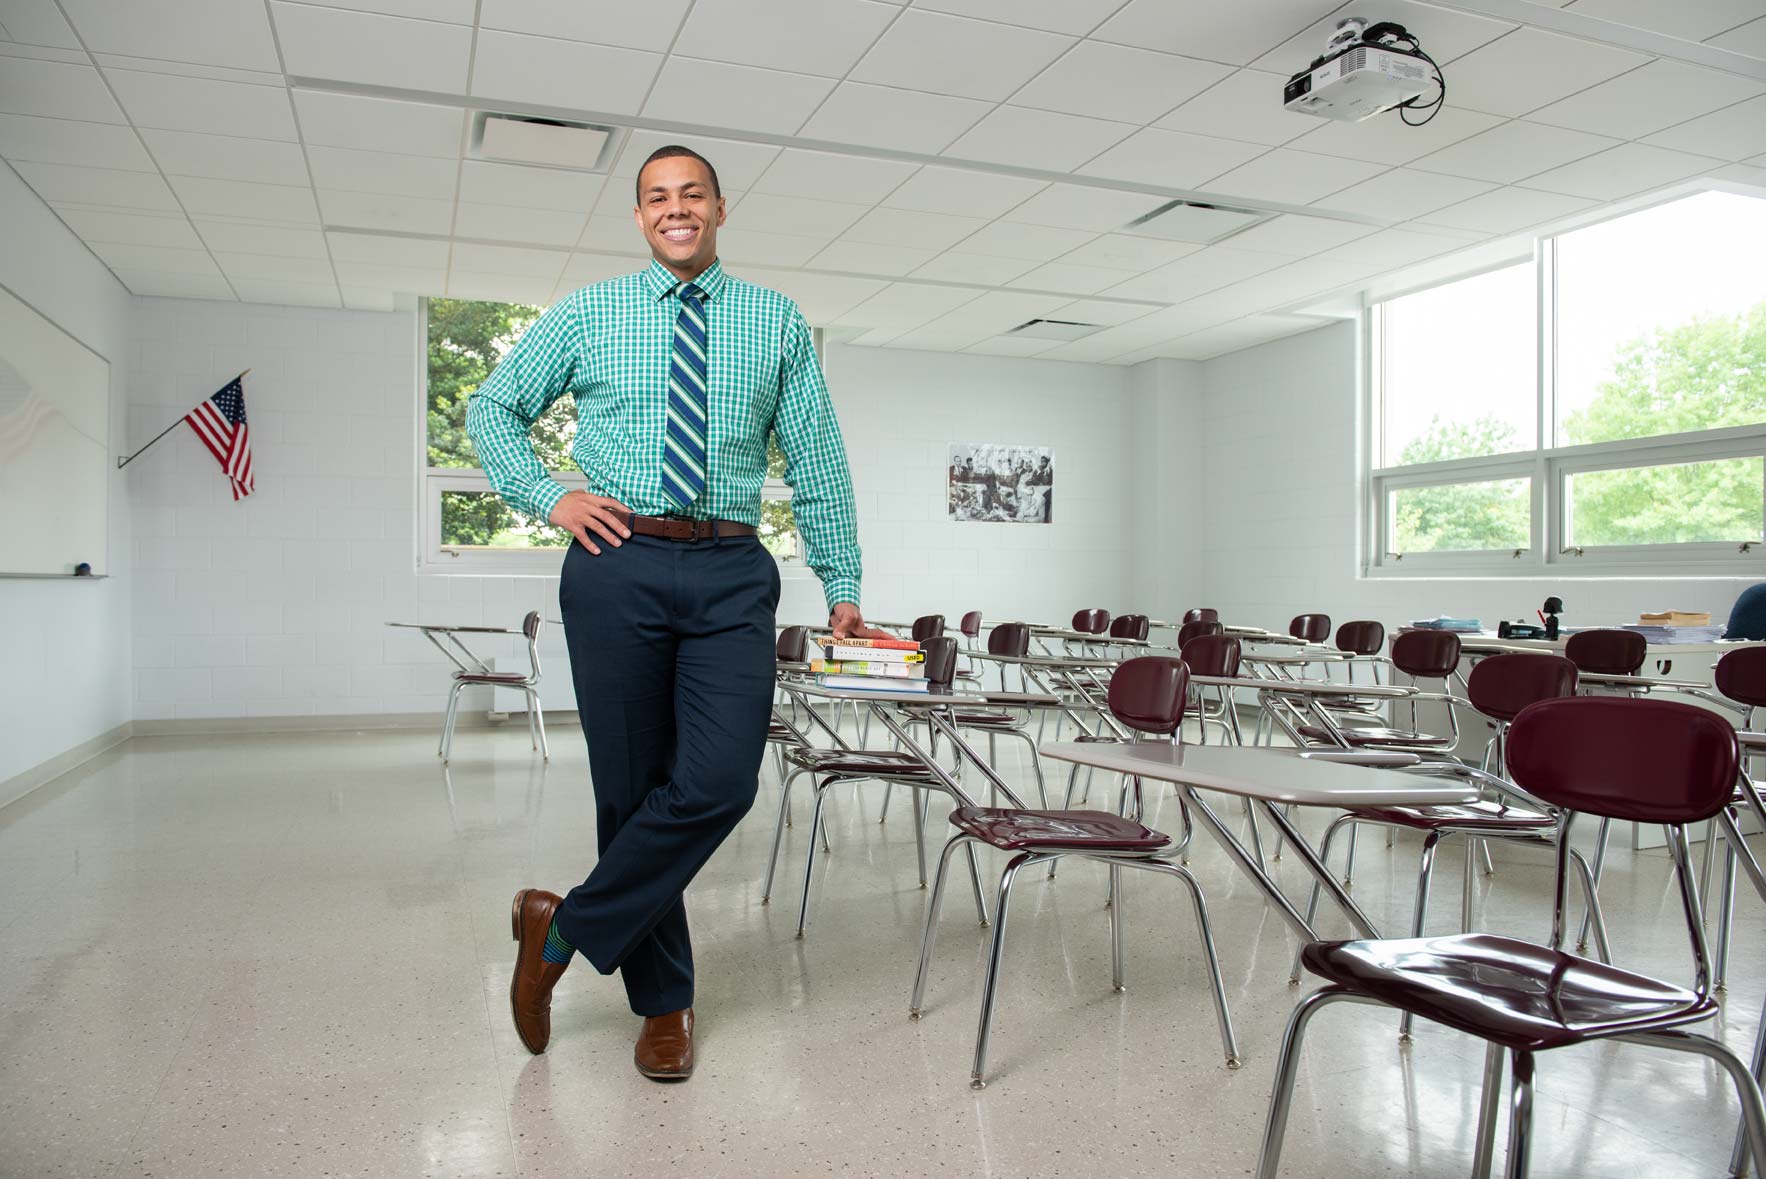 A teacher poses for the camera leaning on a desk in an empty classroom